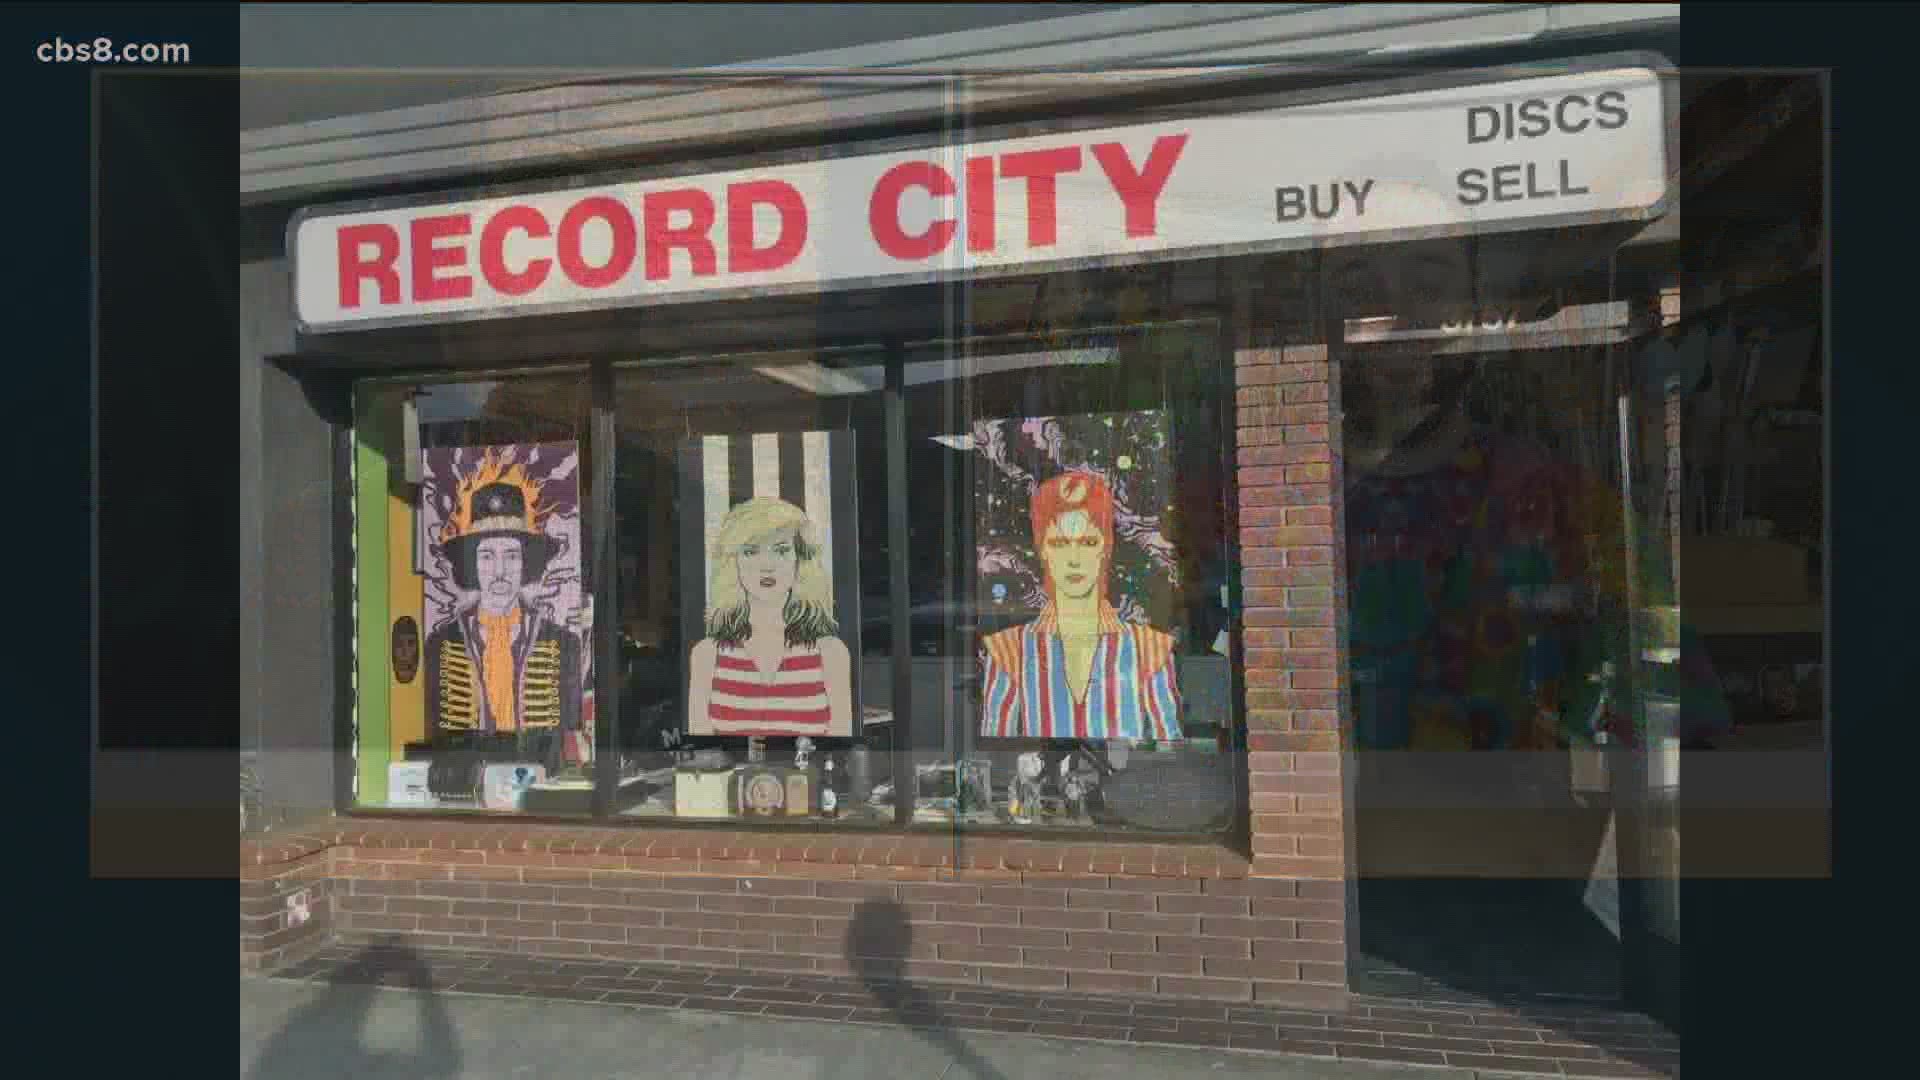 Record City has been a reliable source of music, movies and collectibles for 25 years.  Visit them at 3757 6th Ave. in Hillcrest